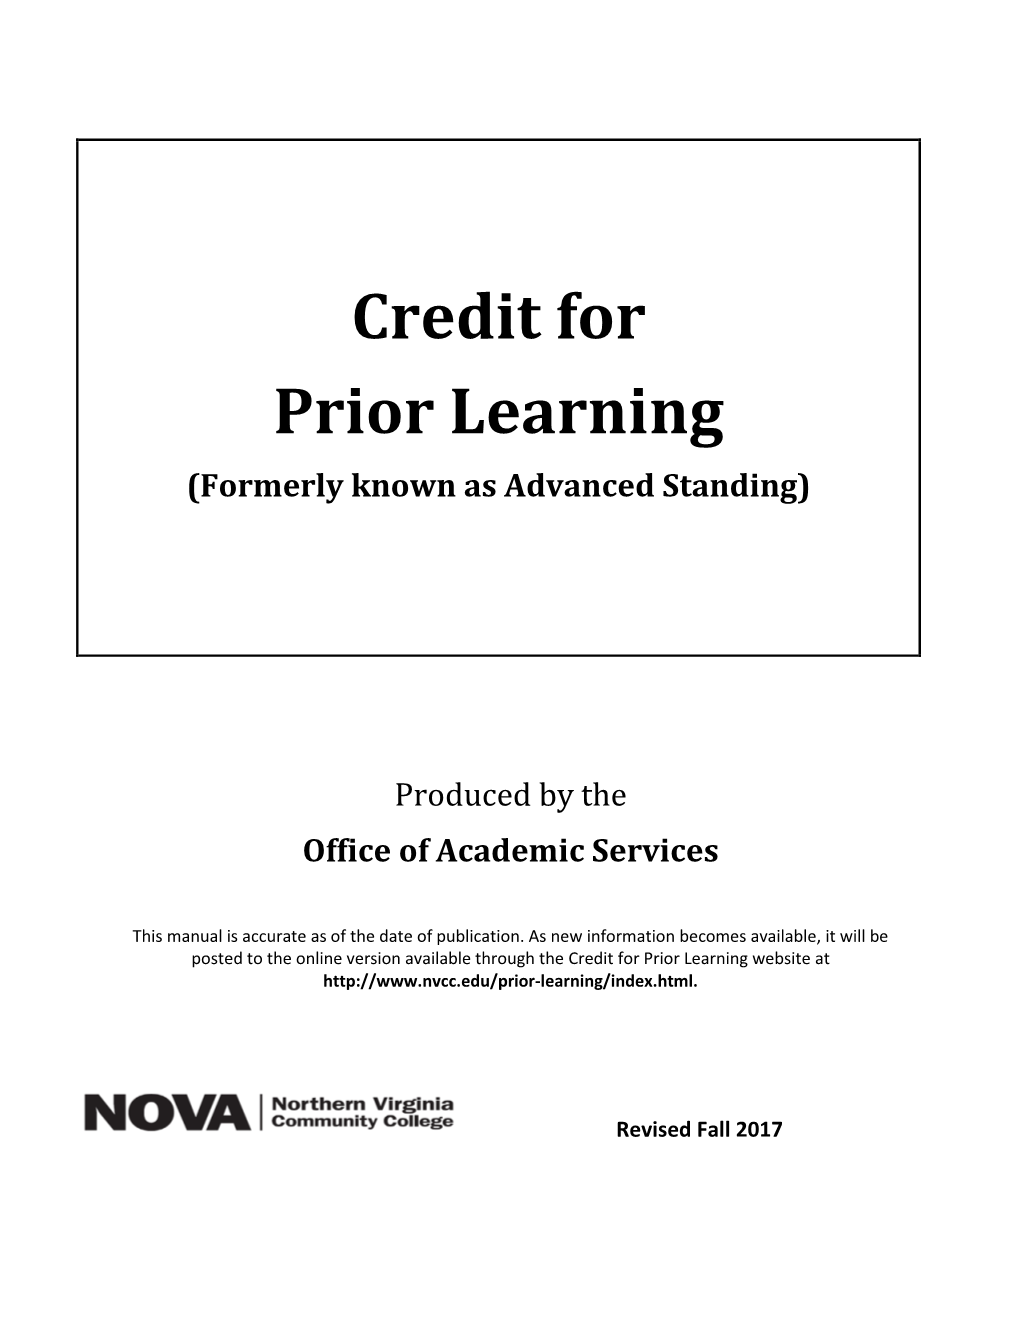 Credit for Prior Learning (Formerly Known As Advanced Standing)